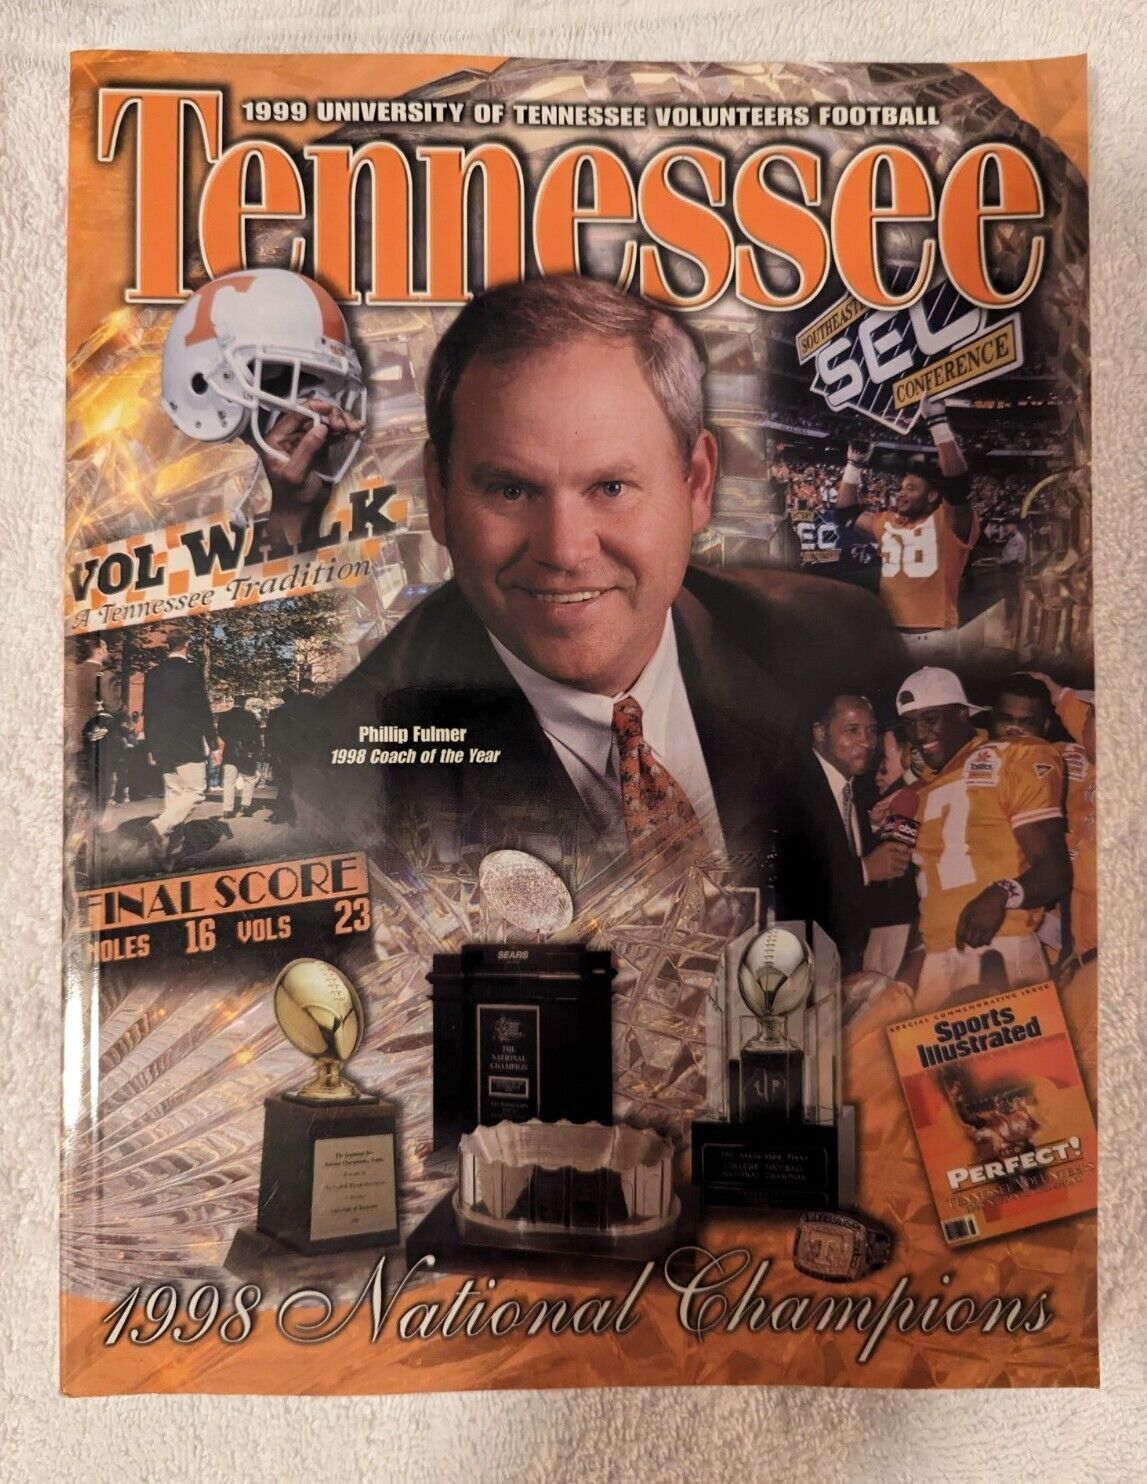 Primary image for 1999 University of Tennessee Volunteers Football Media Guide (National Champs)